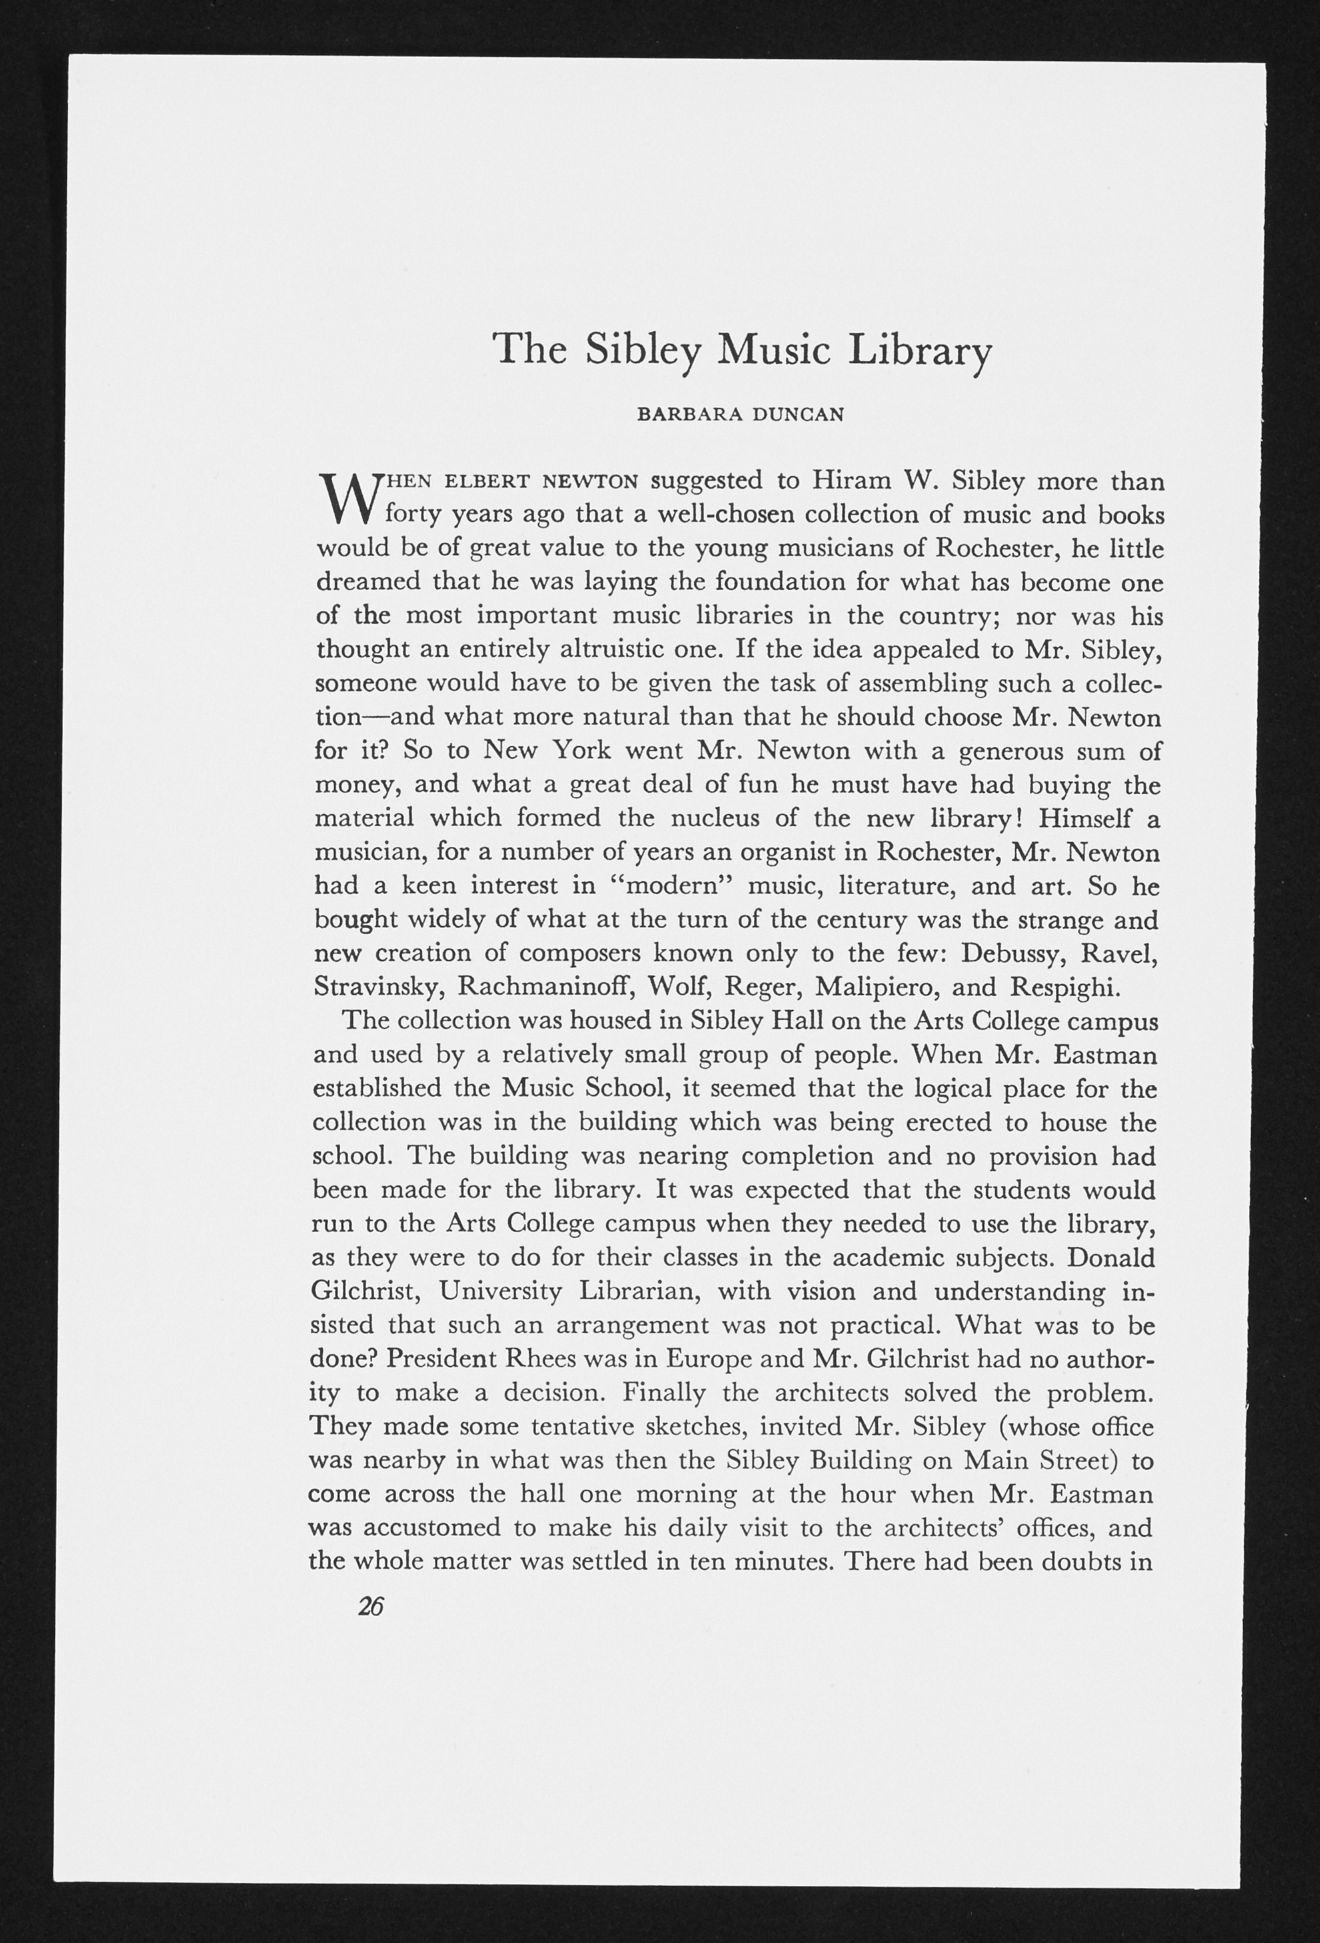 Article on The Sibley Music Library, page 1